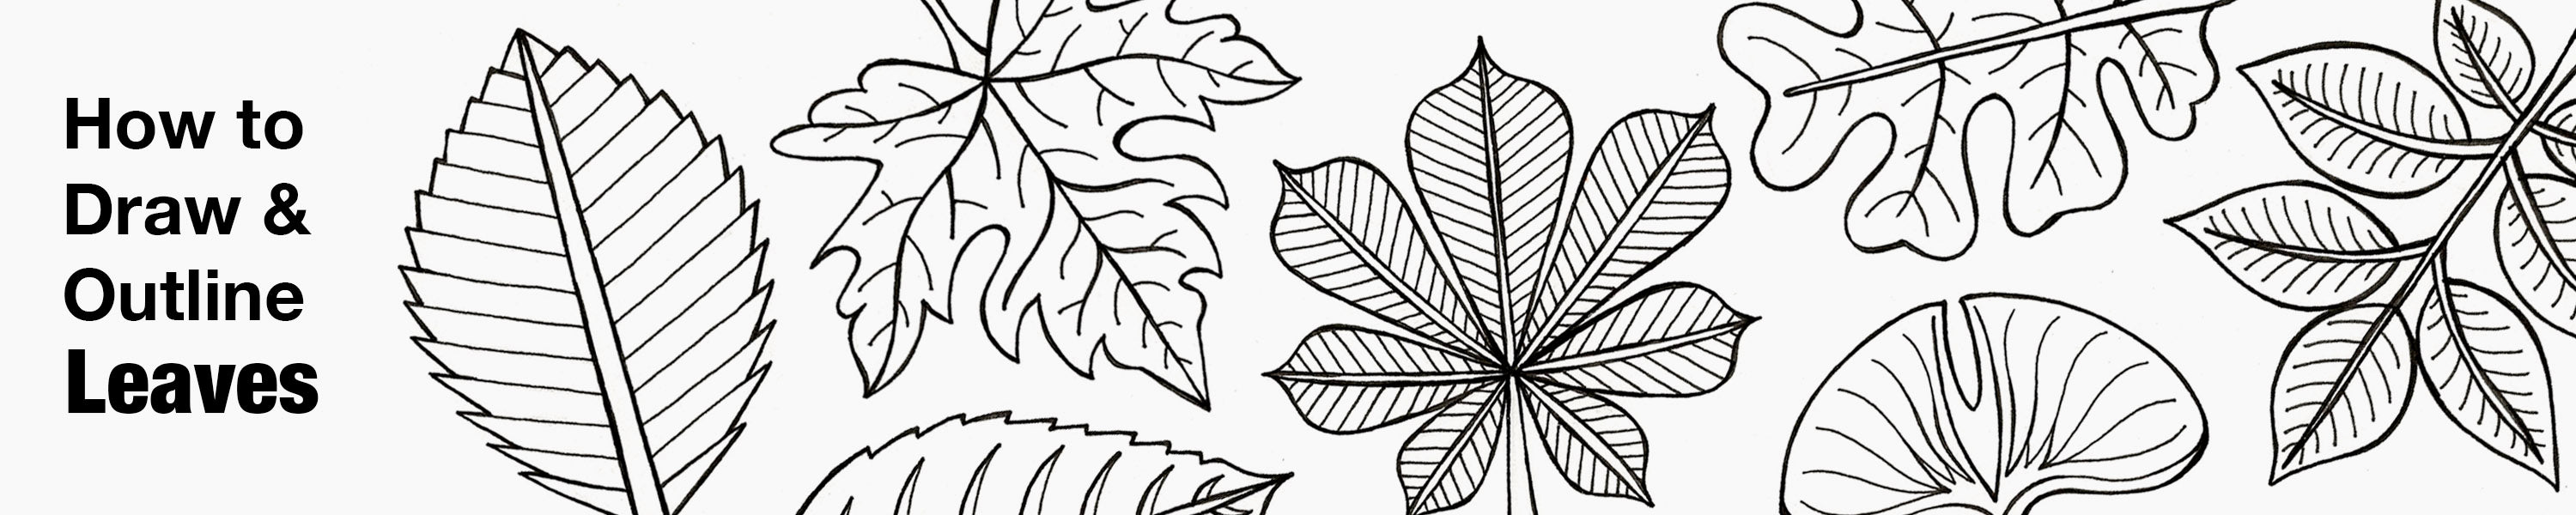 Drawing Leaves of Deciduous Trees